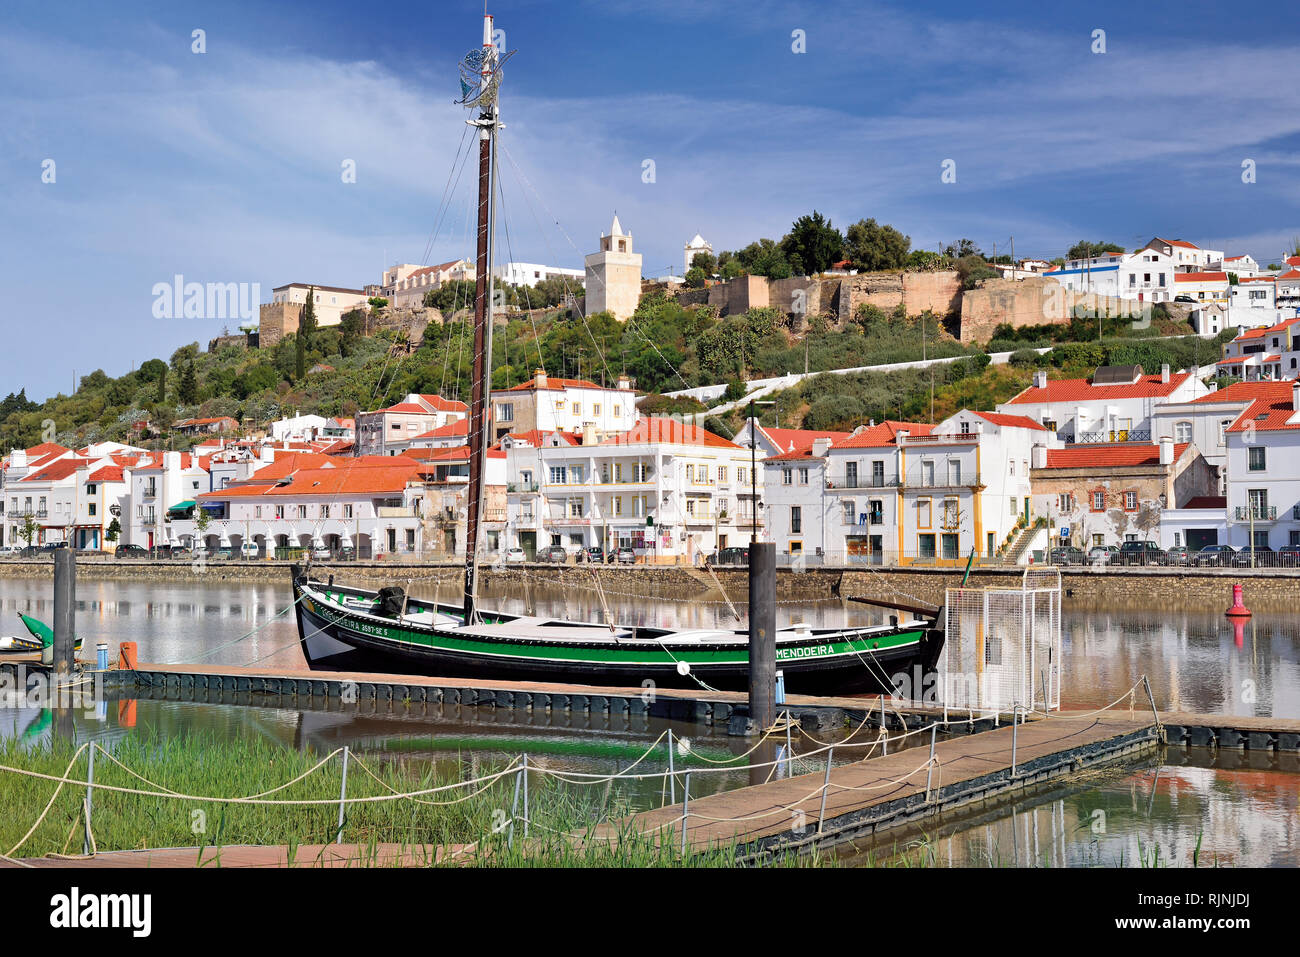 Historical boat anchoring at river quay with idyllic town view Stock Photo